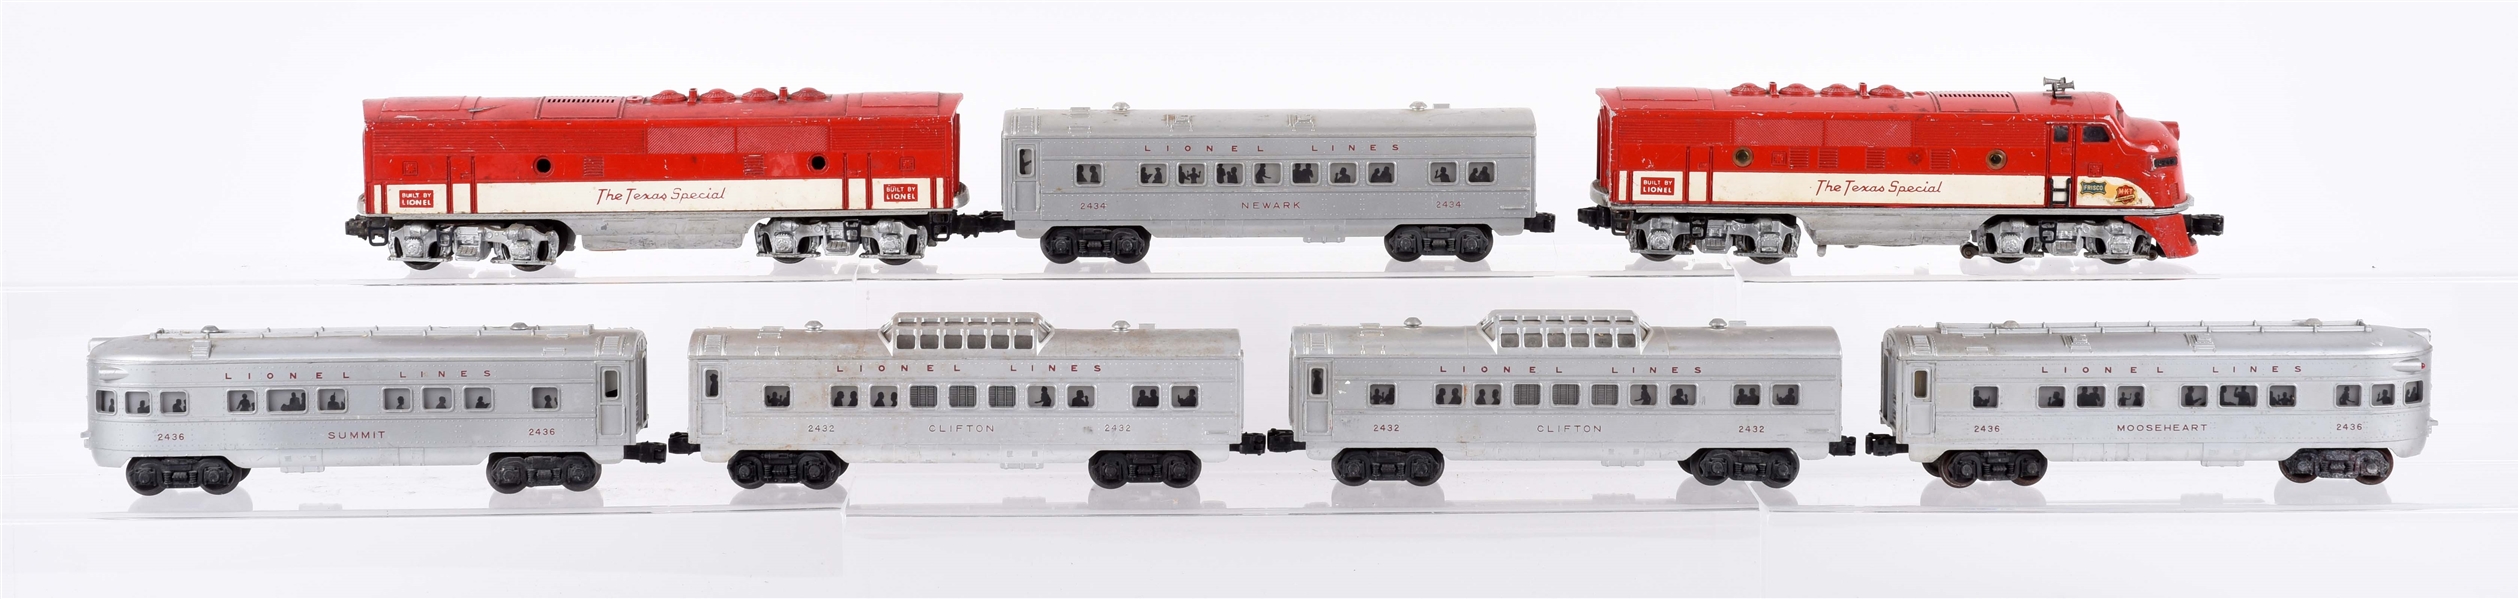 LOT OF 7: LIONEL 2245 TEXAS SPECIAL AB & 5 PASSENGER CARS. 